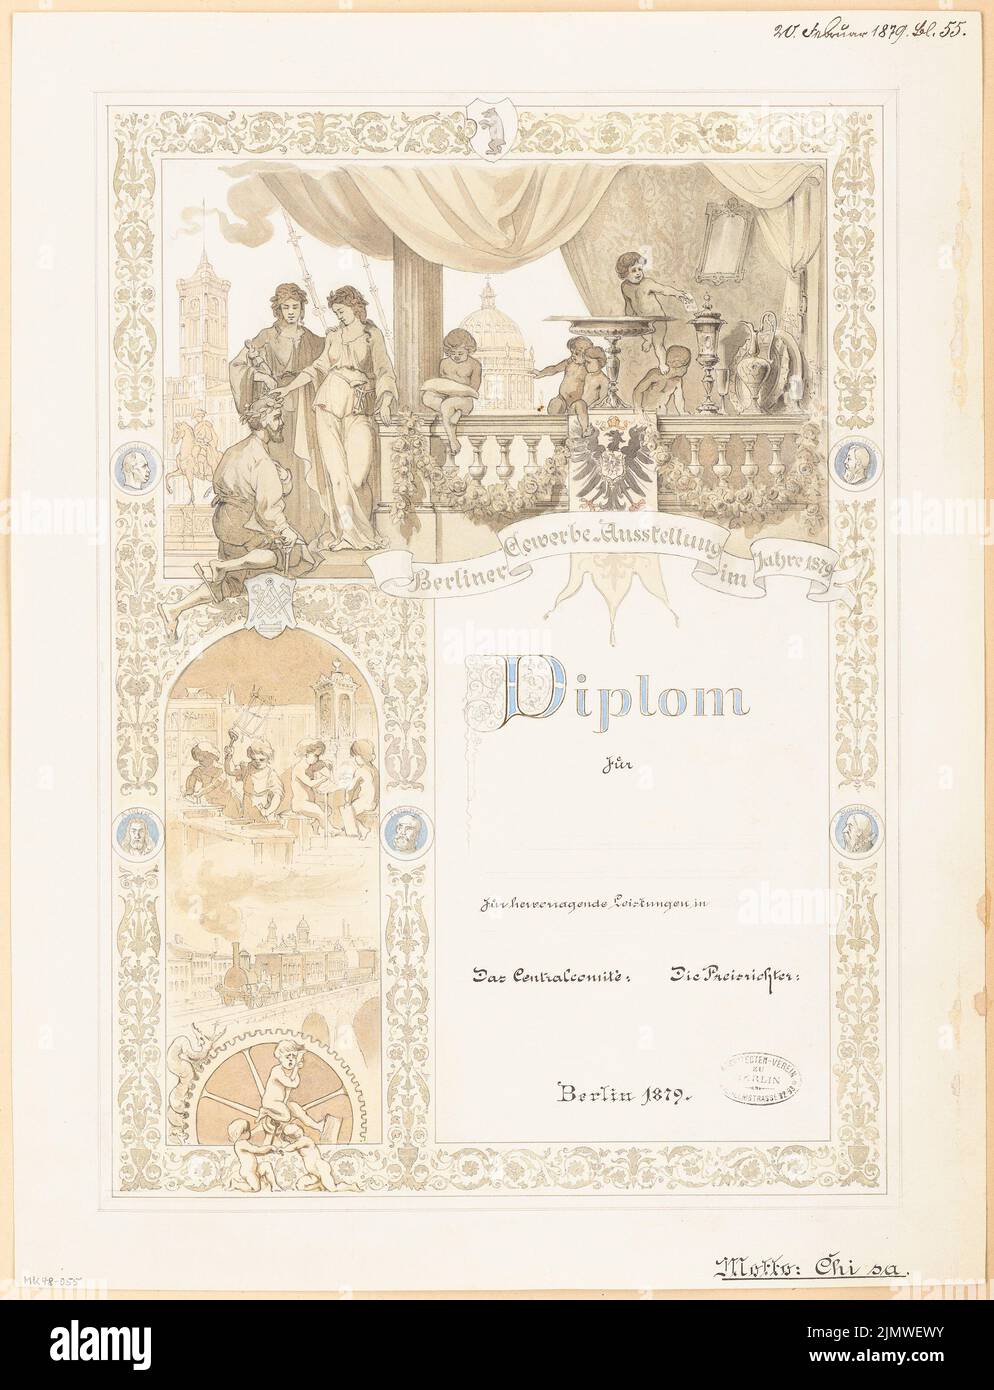 Unknown architect, diploma for the Berlin trade exhibition 1879. Monthly competition February 1879 (02.1879): View. Tusche watercolor on the box, supplemented with pencil, 56.5 x 43.3 cm (including scan edges) N.N. : Diplom für die Berliner Gewerbeausstellung 1879. Monatskonkurrenz Februar 1879 Stock Photo